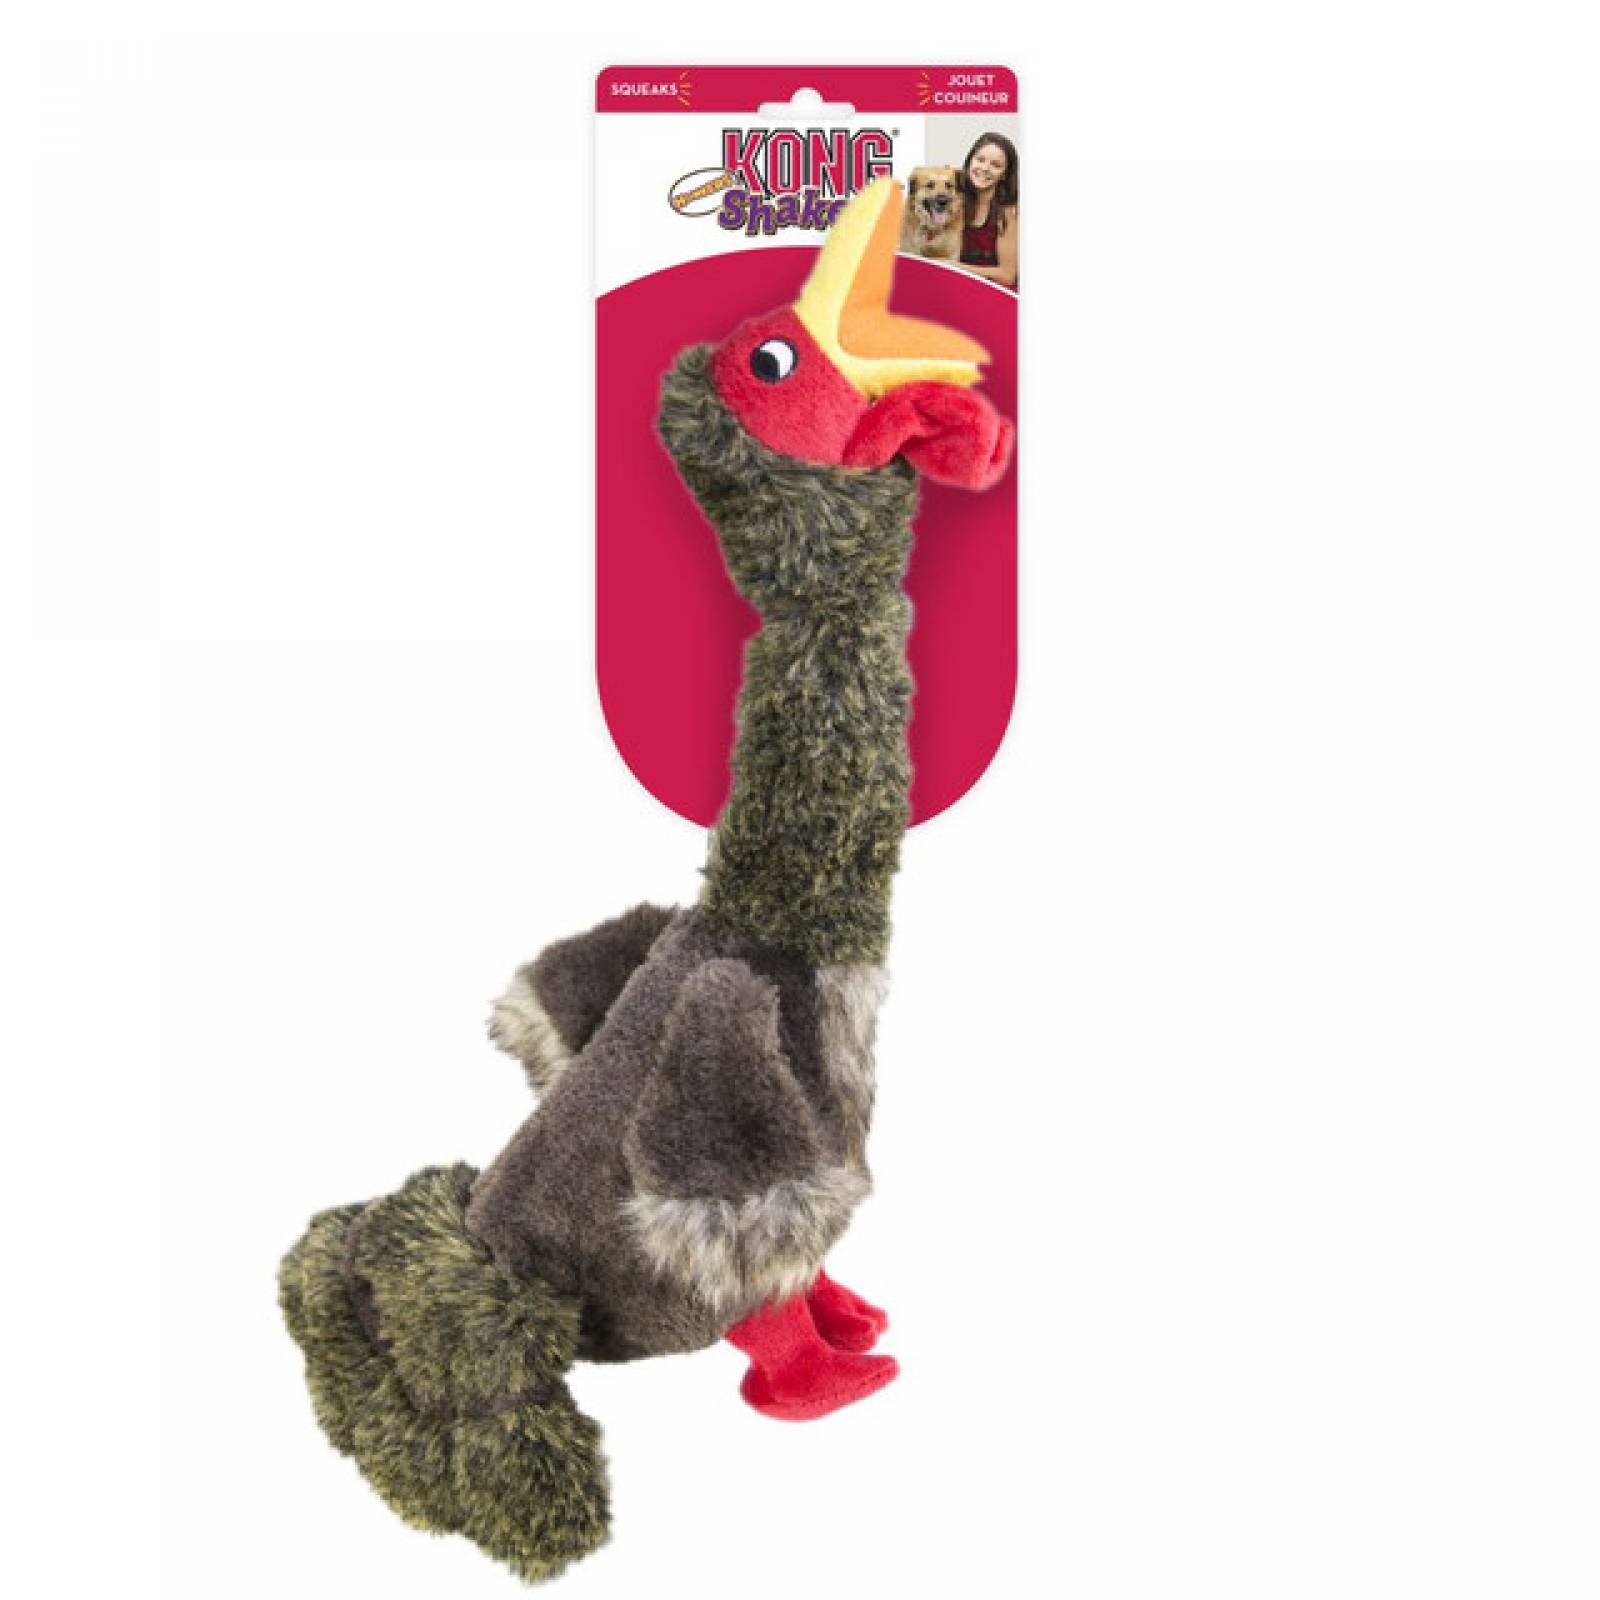 Kong juguete para perro peluche con chillido Shakers Honkers Pavo Ch